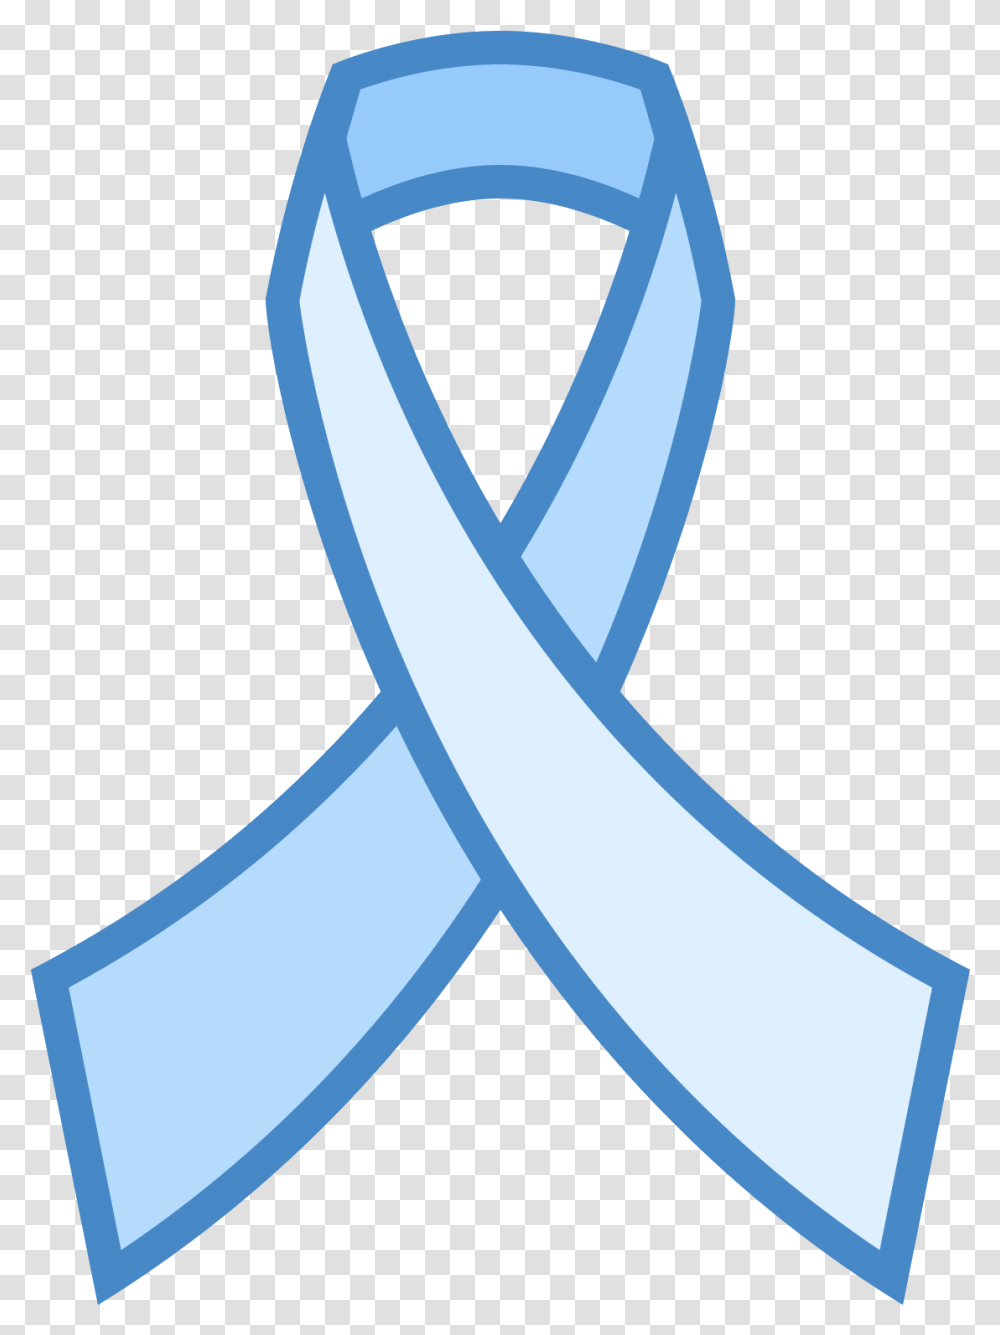 Blue Ribbon Aids Icon Image With No Blue Ribbon Aids Transparent Png